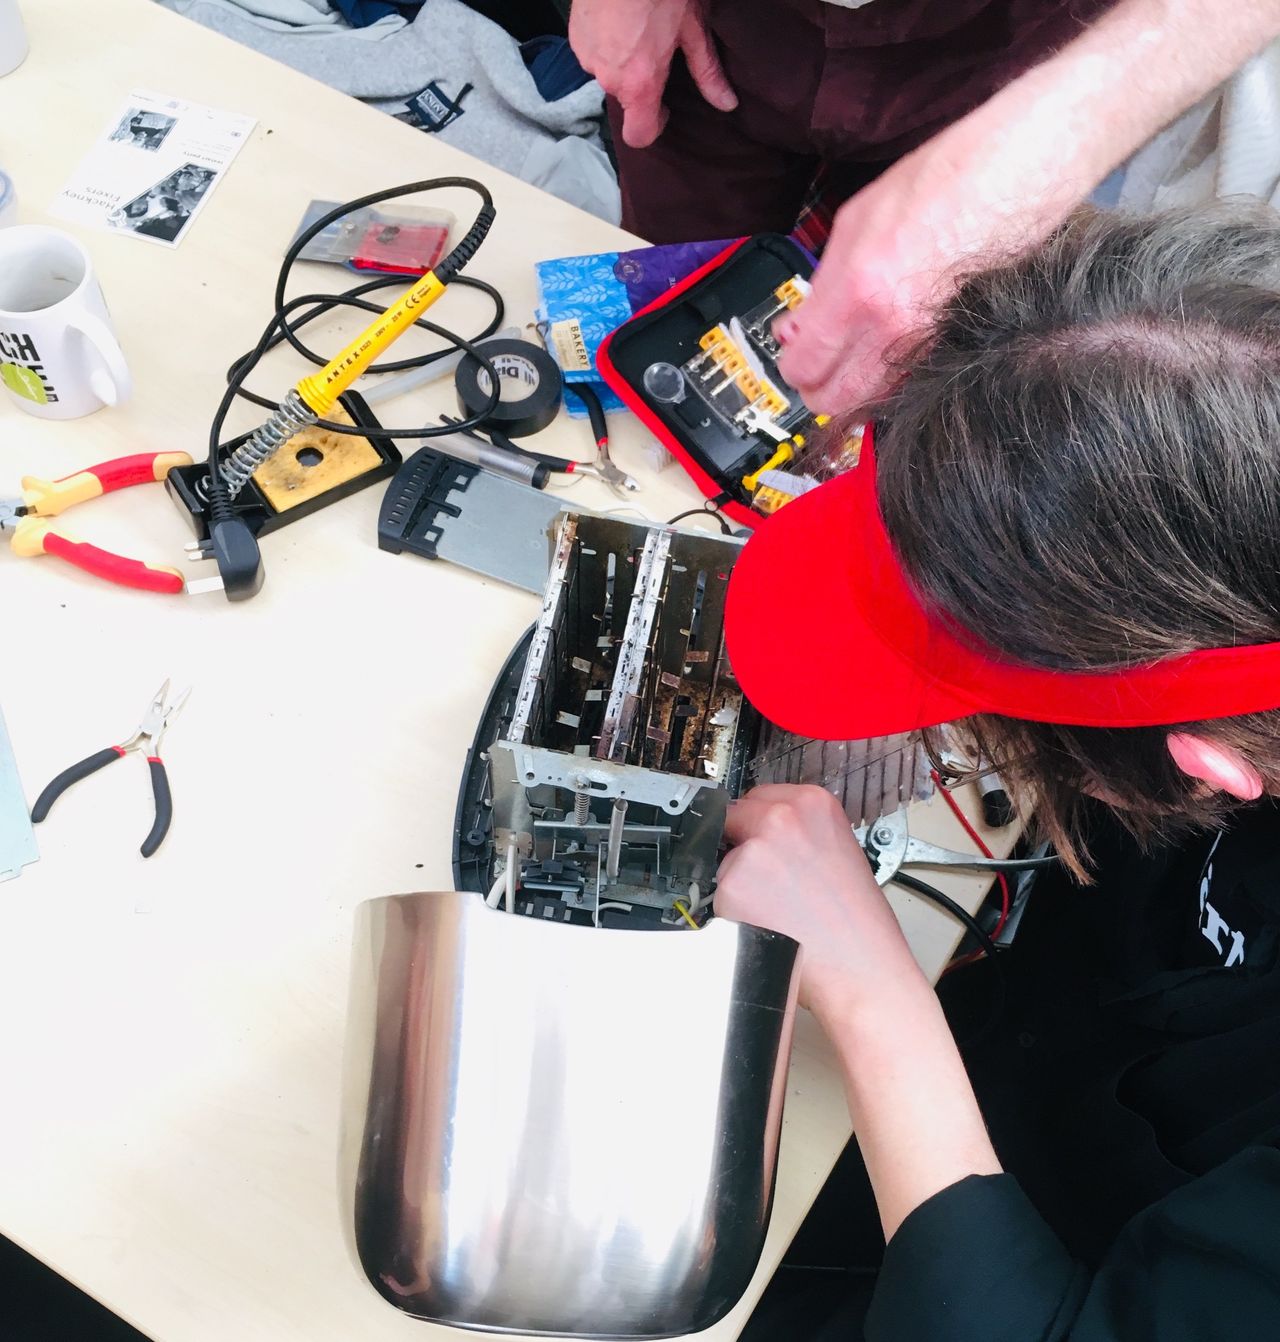 A volunteer "fixpert" assesses a broken toaster at the repair event I went to in London. The aim isn't just to fix the appliance but to share repair skills and confidence with its owner.